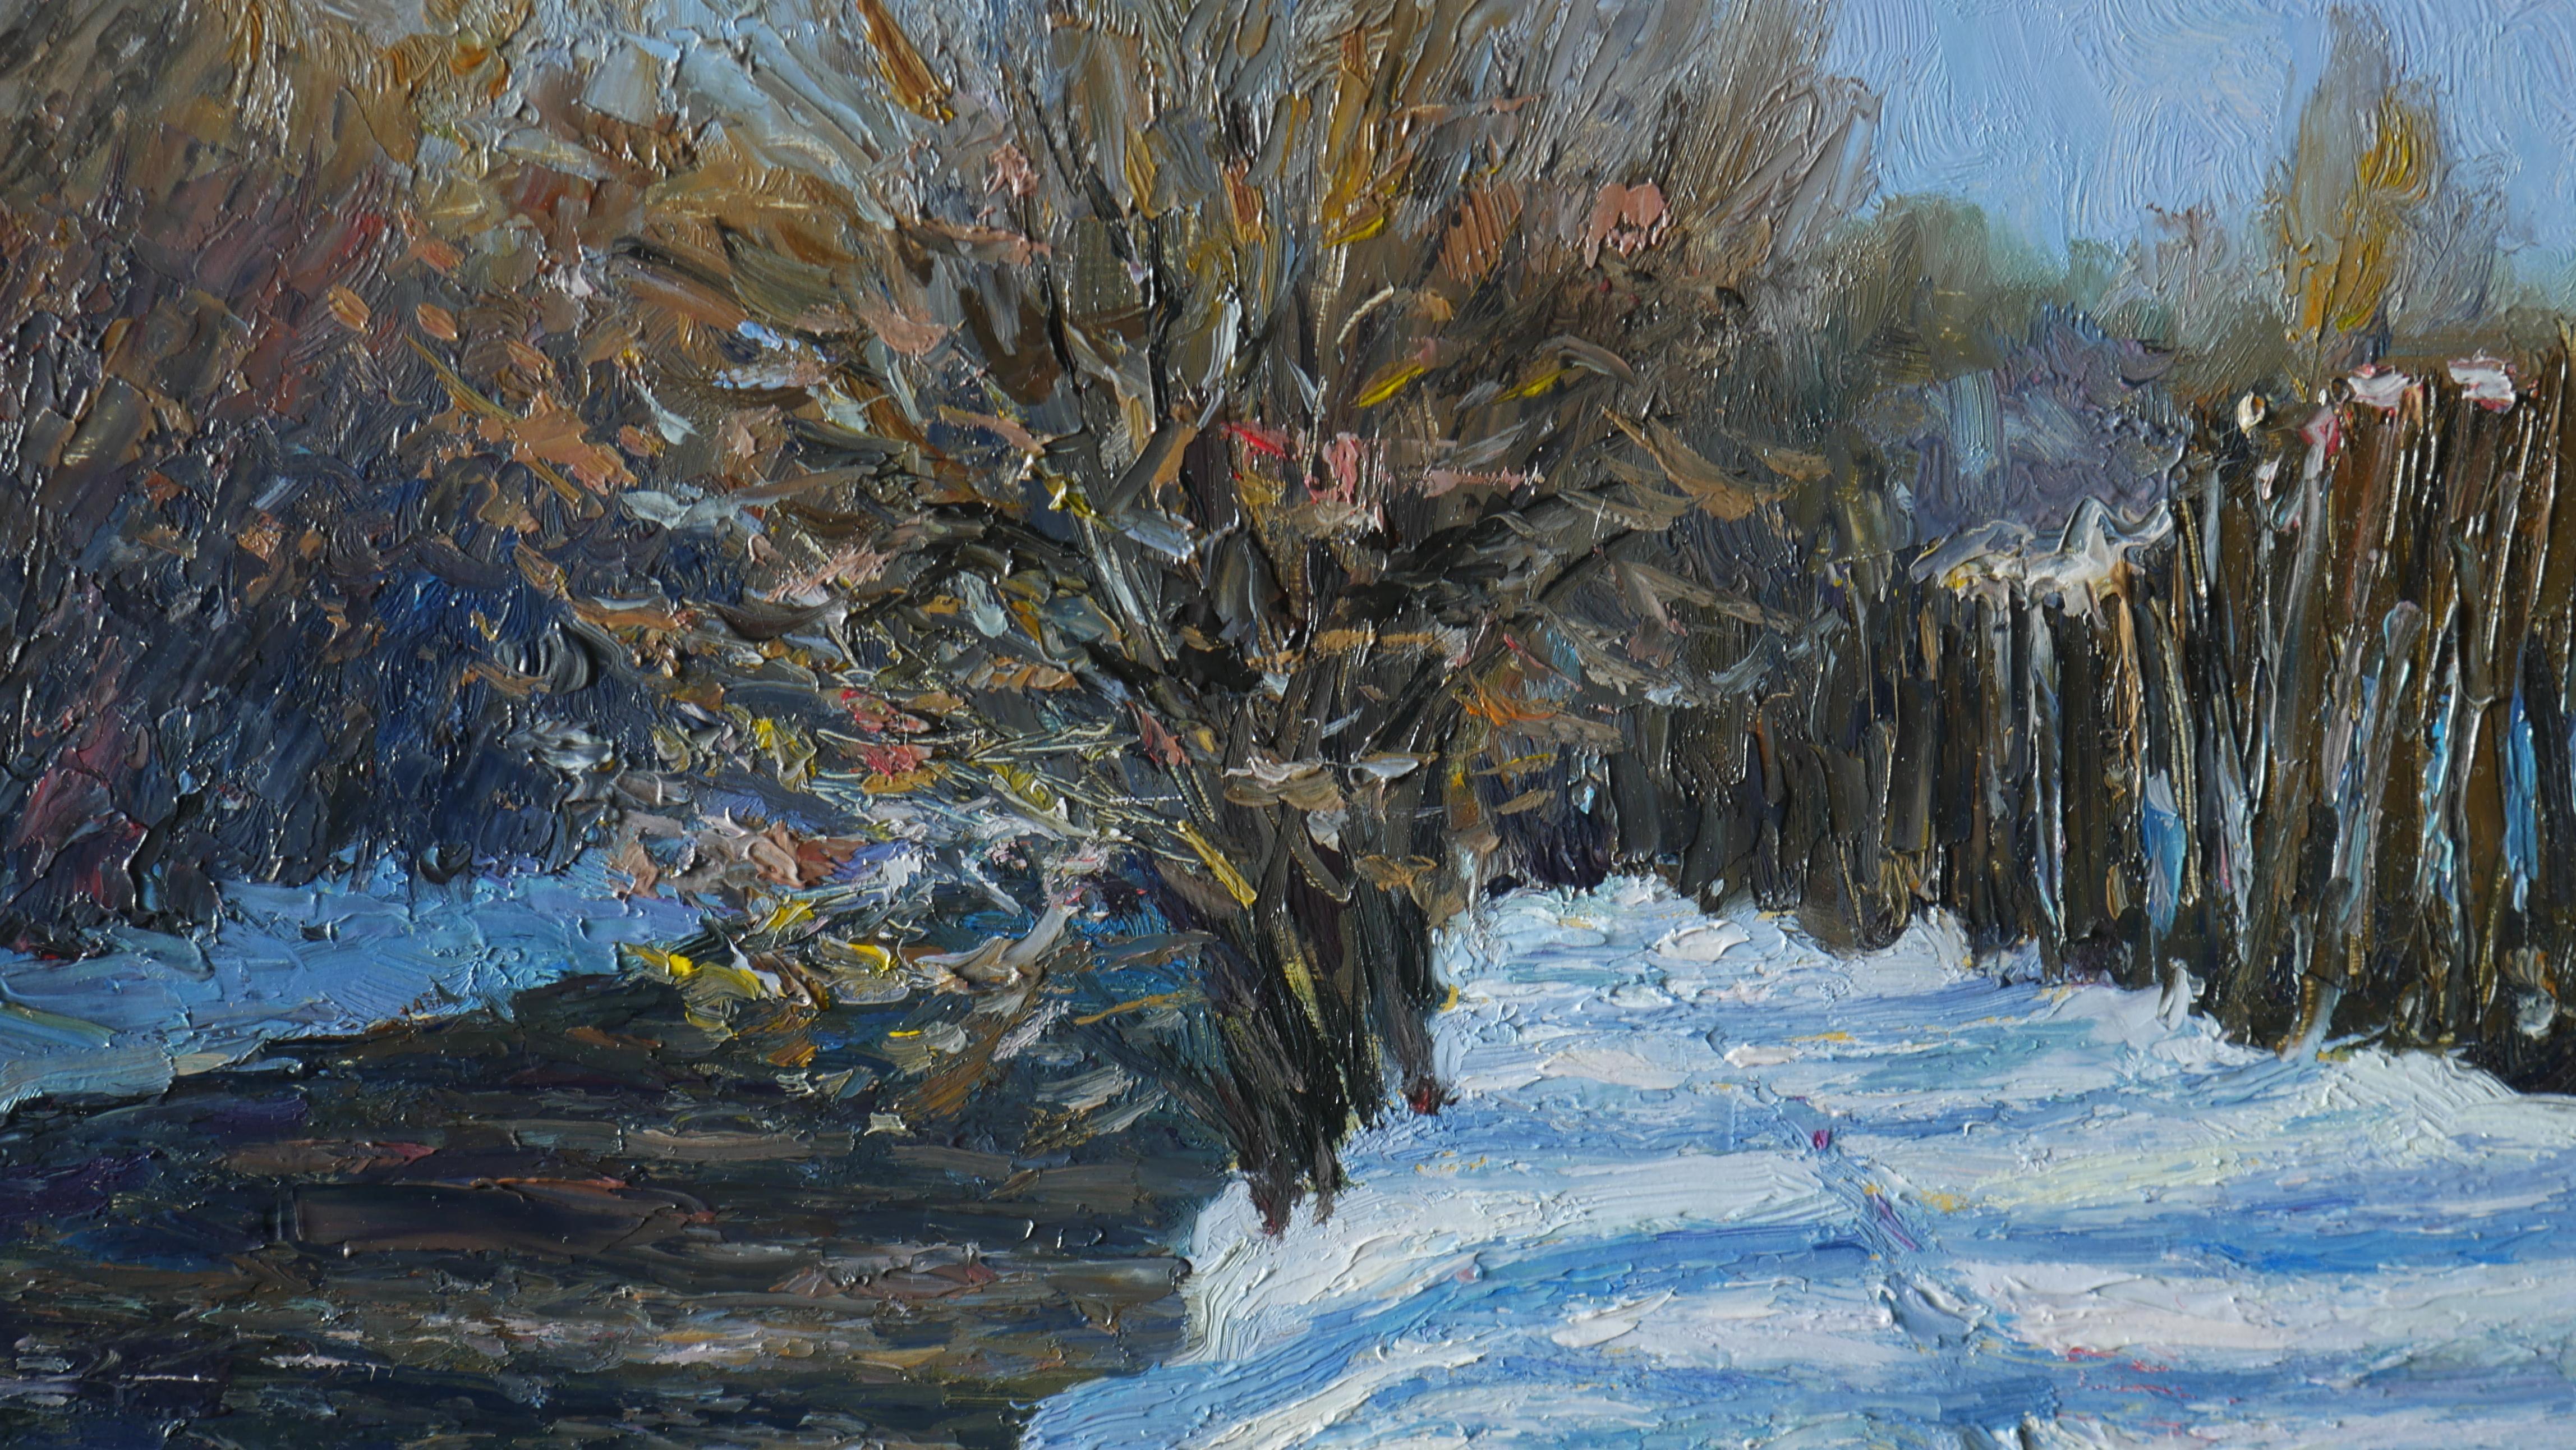 Nikolay paints winter paintings very seldom. But if there is the opportunity he tries to do his best to go painting in winter. Nikolay especially likes winter sunny days. He's always inspired by violet shadows and bright warm light. The lively